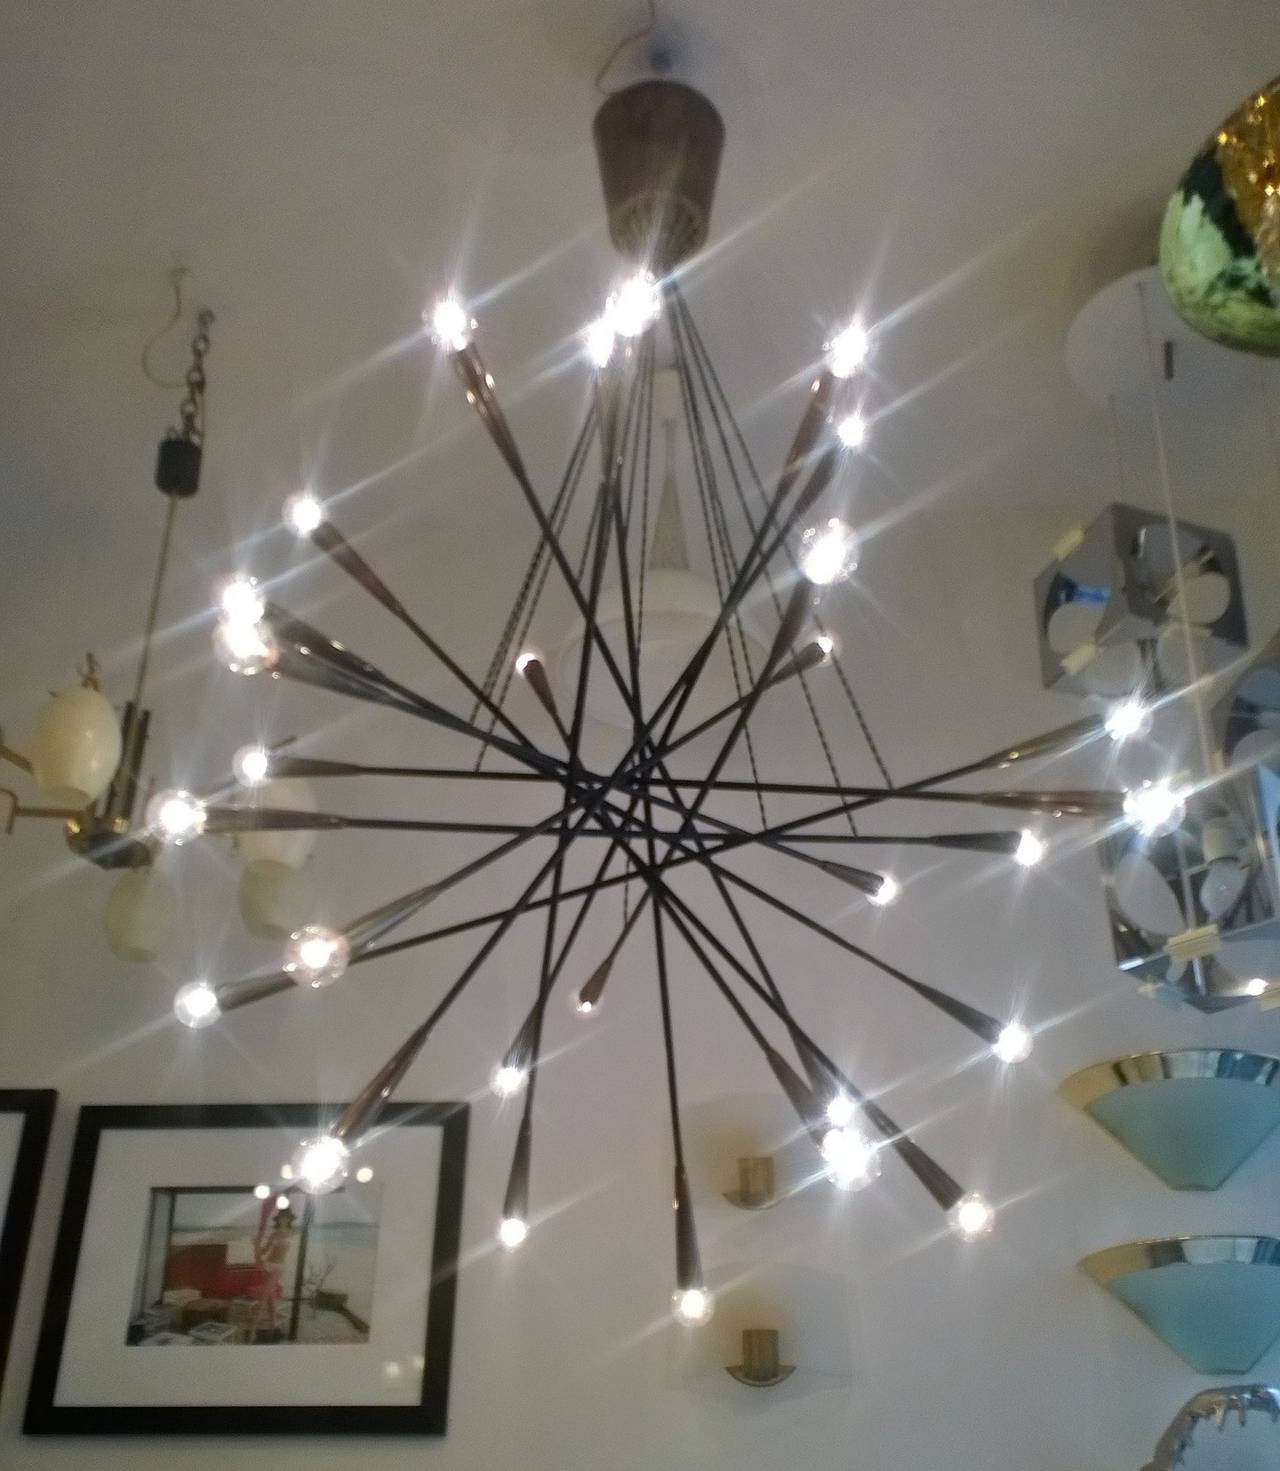 An original 1950s large Italian 26 light chandelier. It is composed of aged brass rods and cone sockets suspended by twisted silk electrical cords.